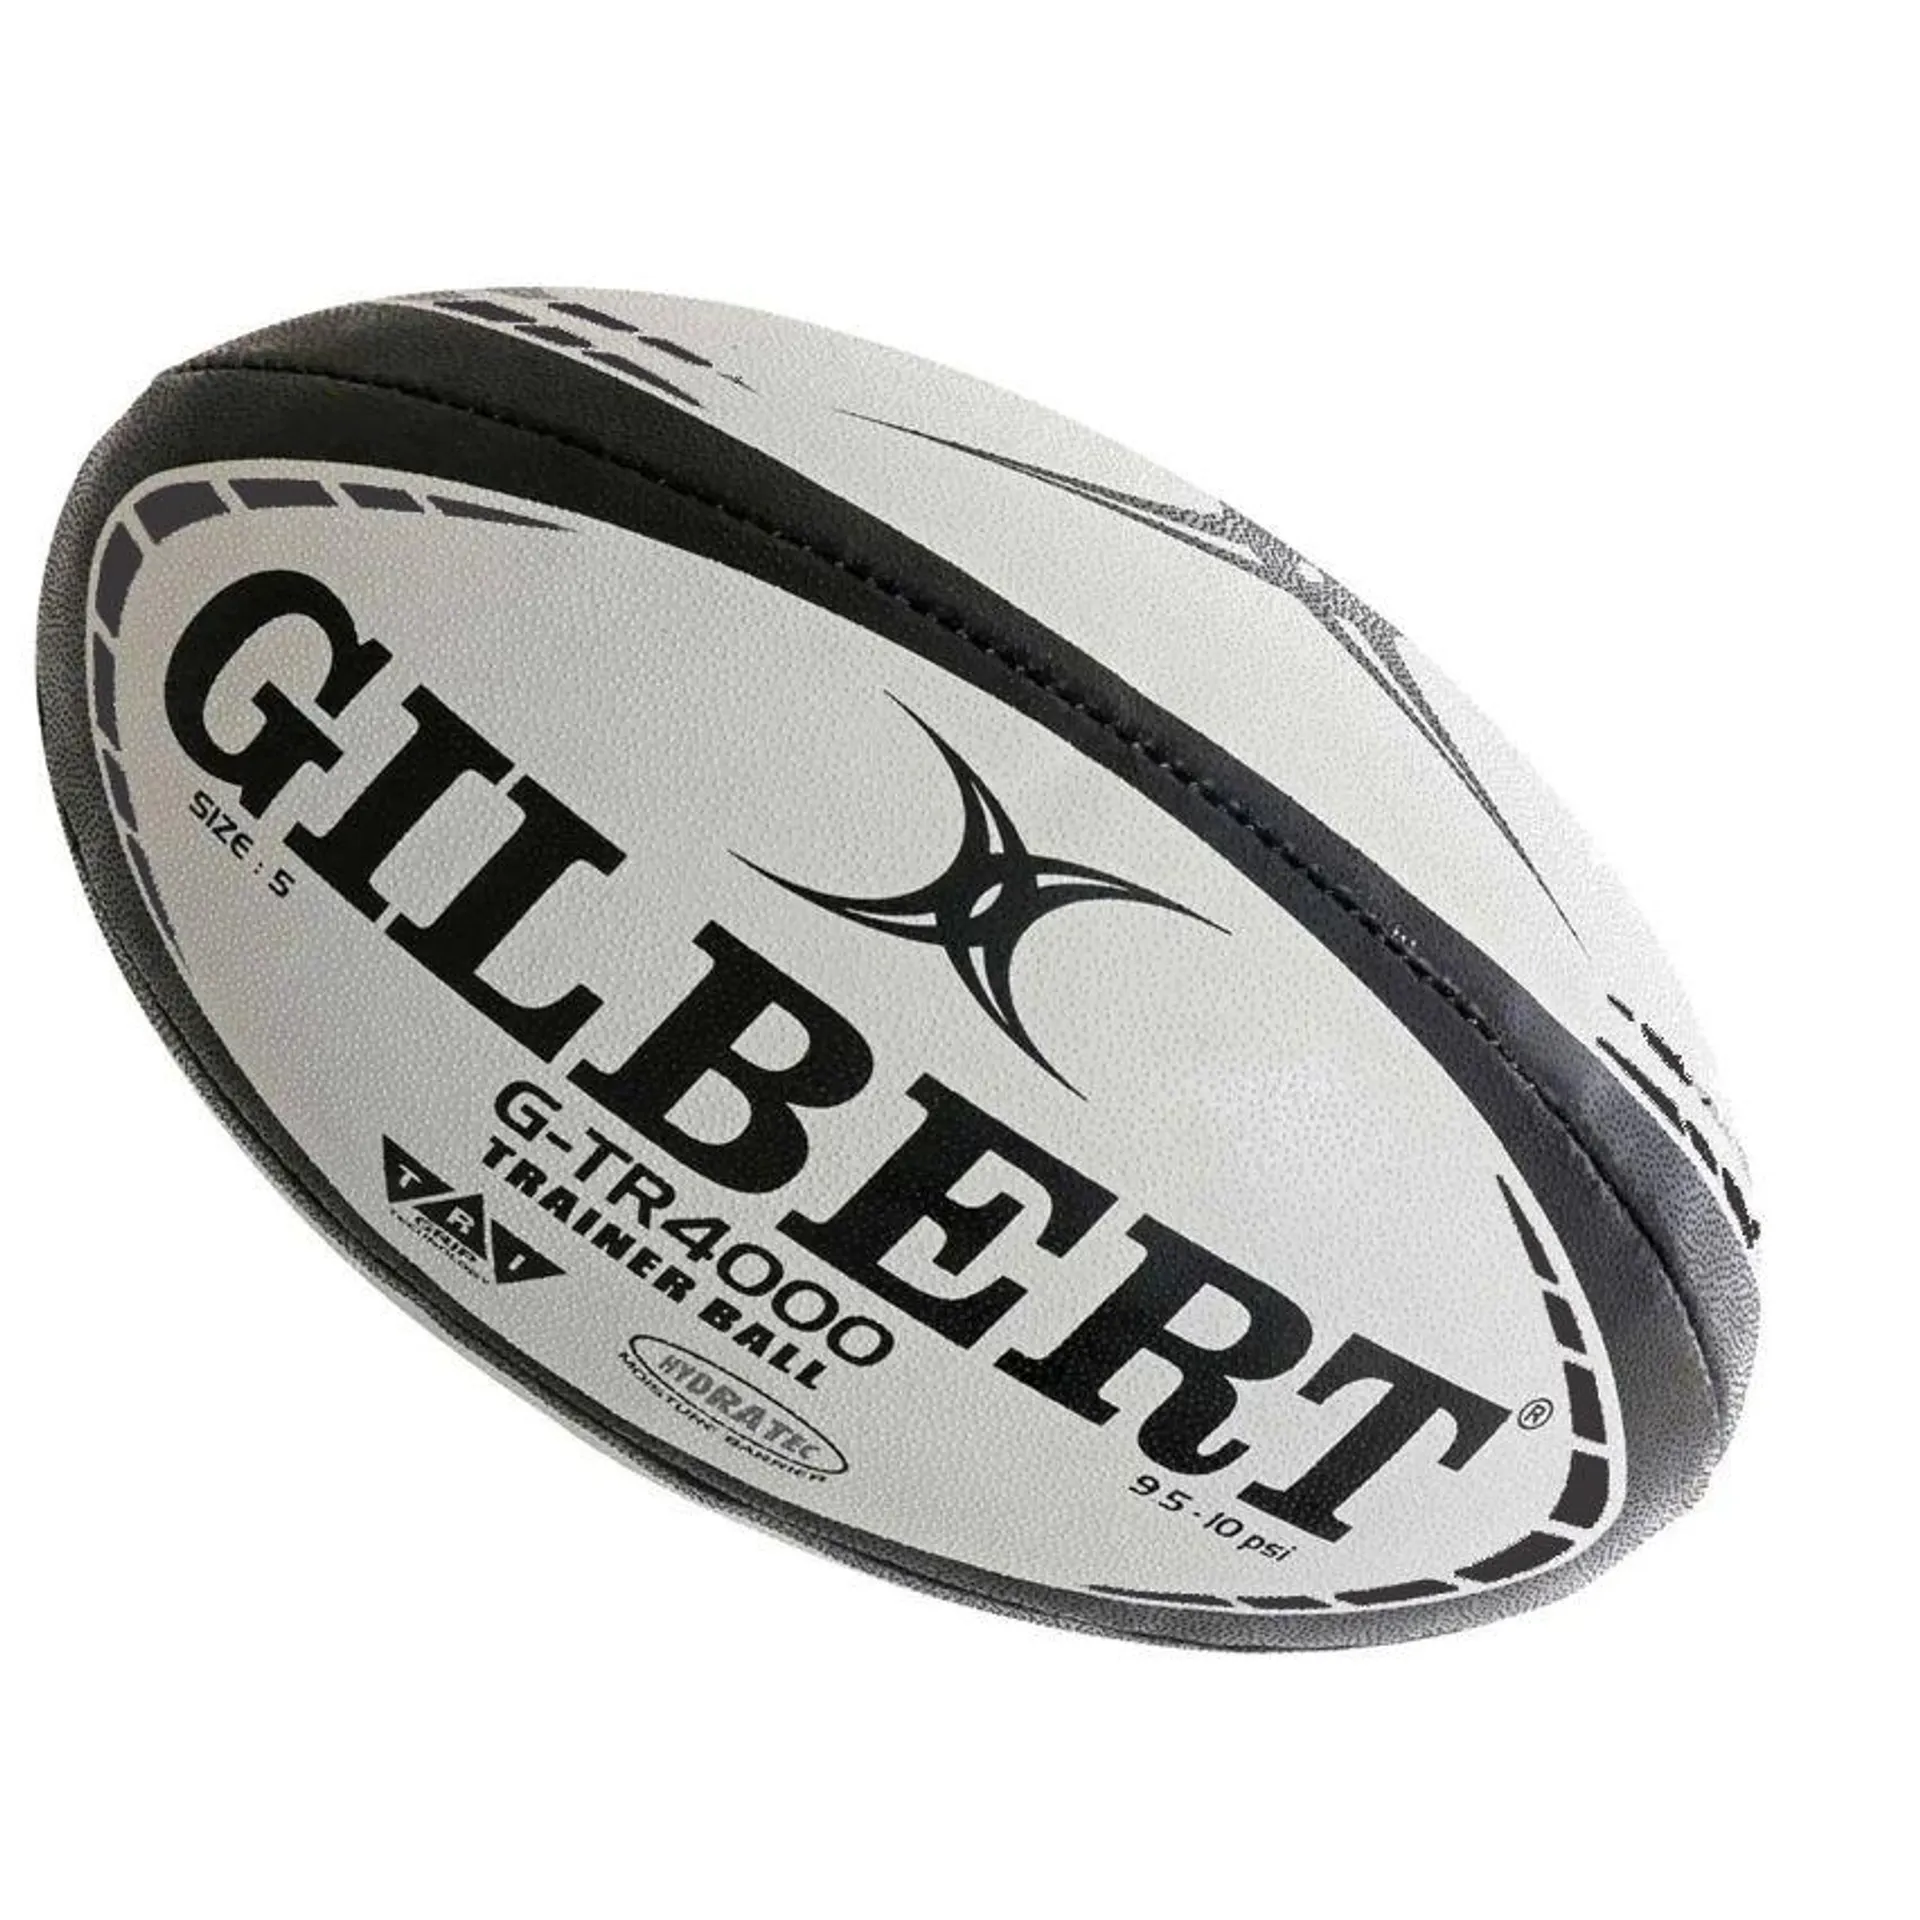 Ballon Rugby Entrainement G-TR4000 Boutique-Rugby.com Taille 5 - Gilbert